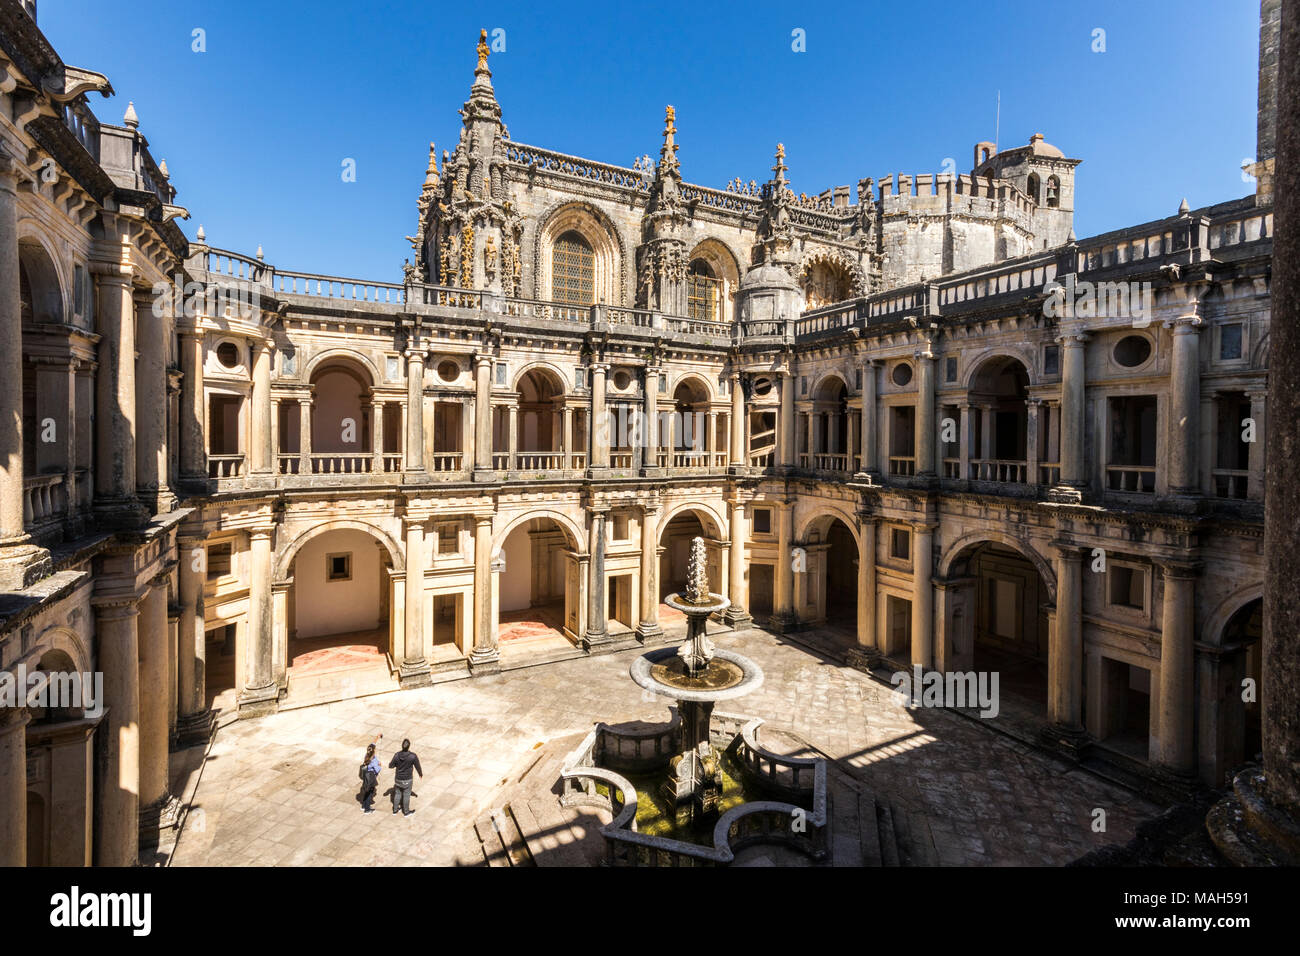 Convent of Christ. Tomar, Portugal. Renaissance Cloister of John III and Manueline style church. World Heritage Site since 1983 Stock Photo